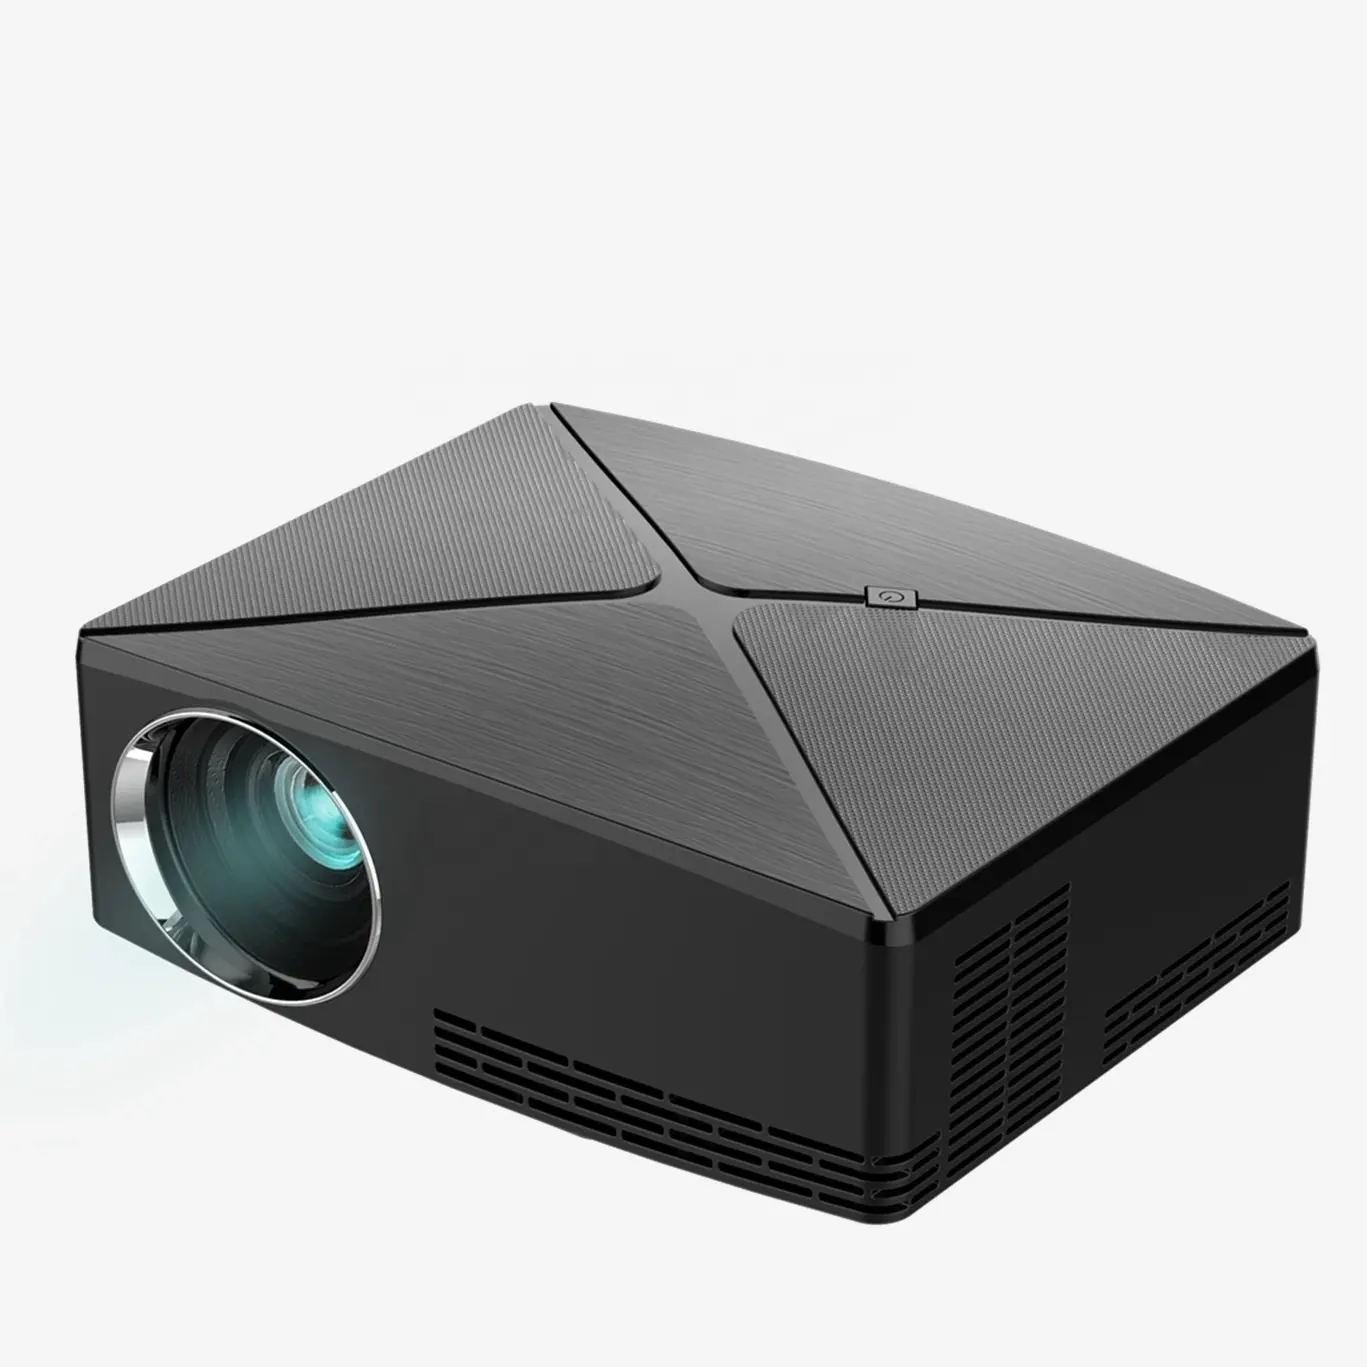 Vivibright c80up LED LCD Cheap Mini Portable Home Theater Video Multimedia Projector Smart FHD 1080P PC Beam Projector